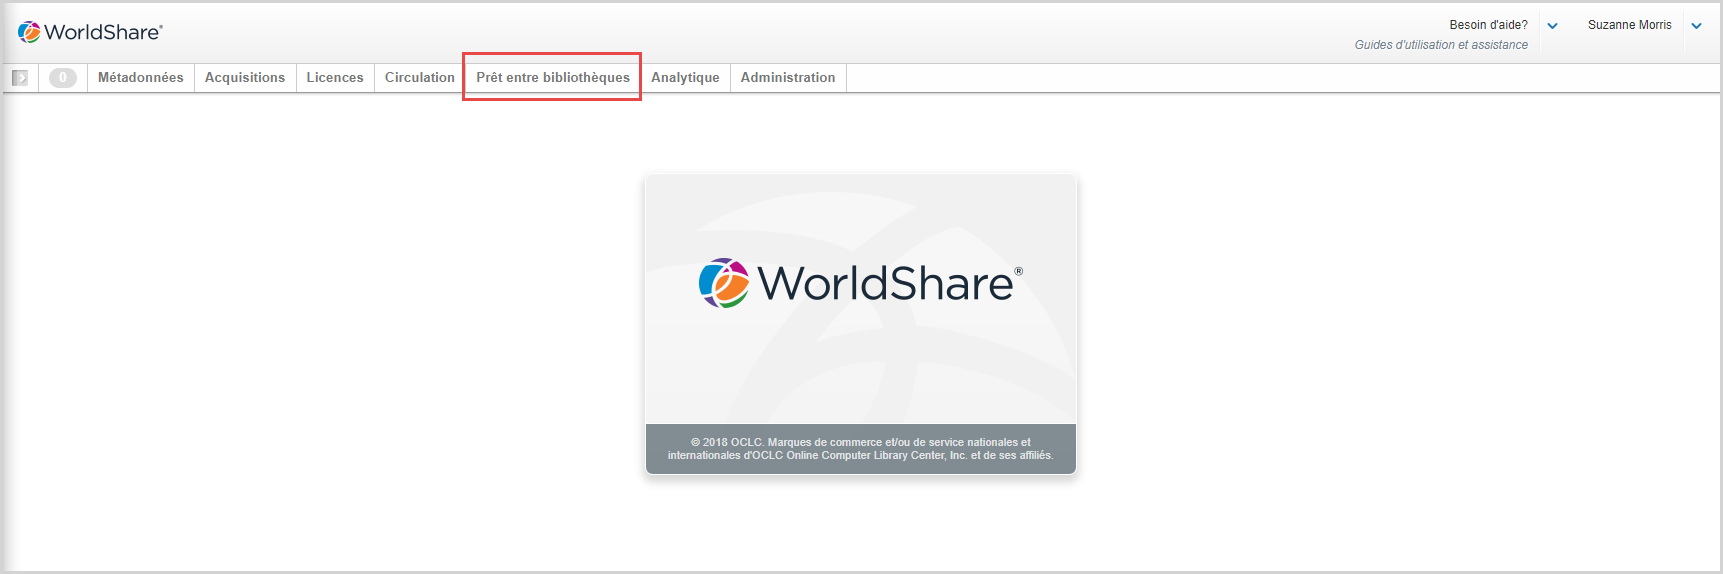 (ENGLISH COMMENT) Screenshot of the WorldShare interface with the Interlibrary Loan module called out